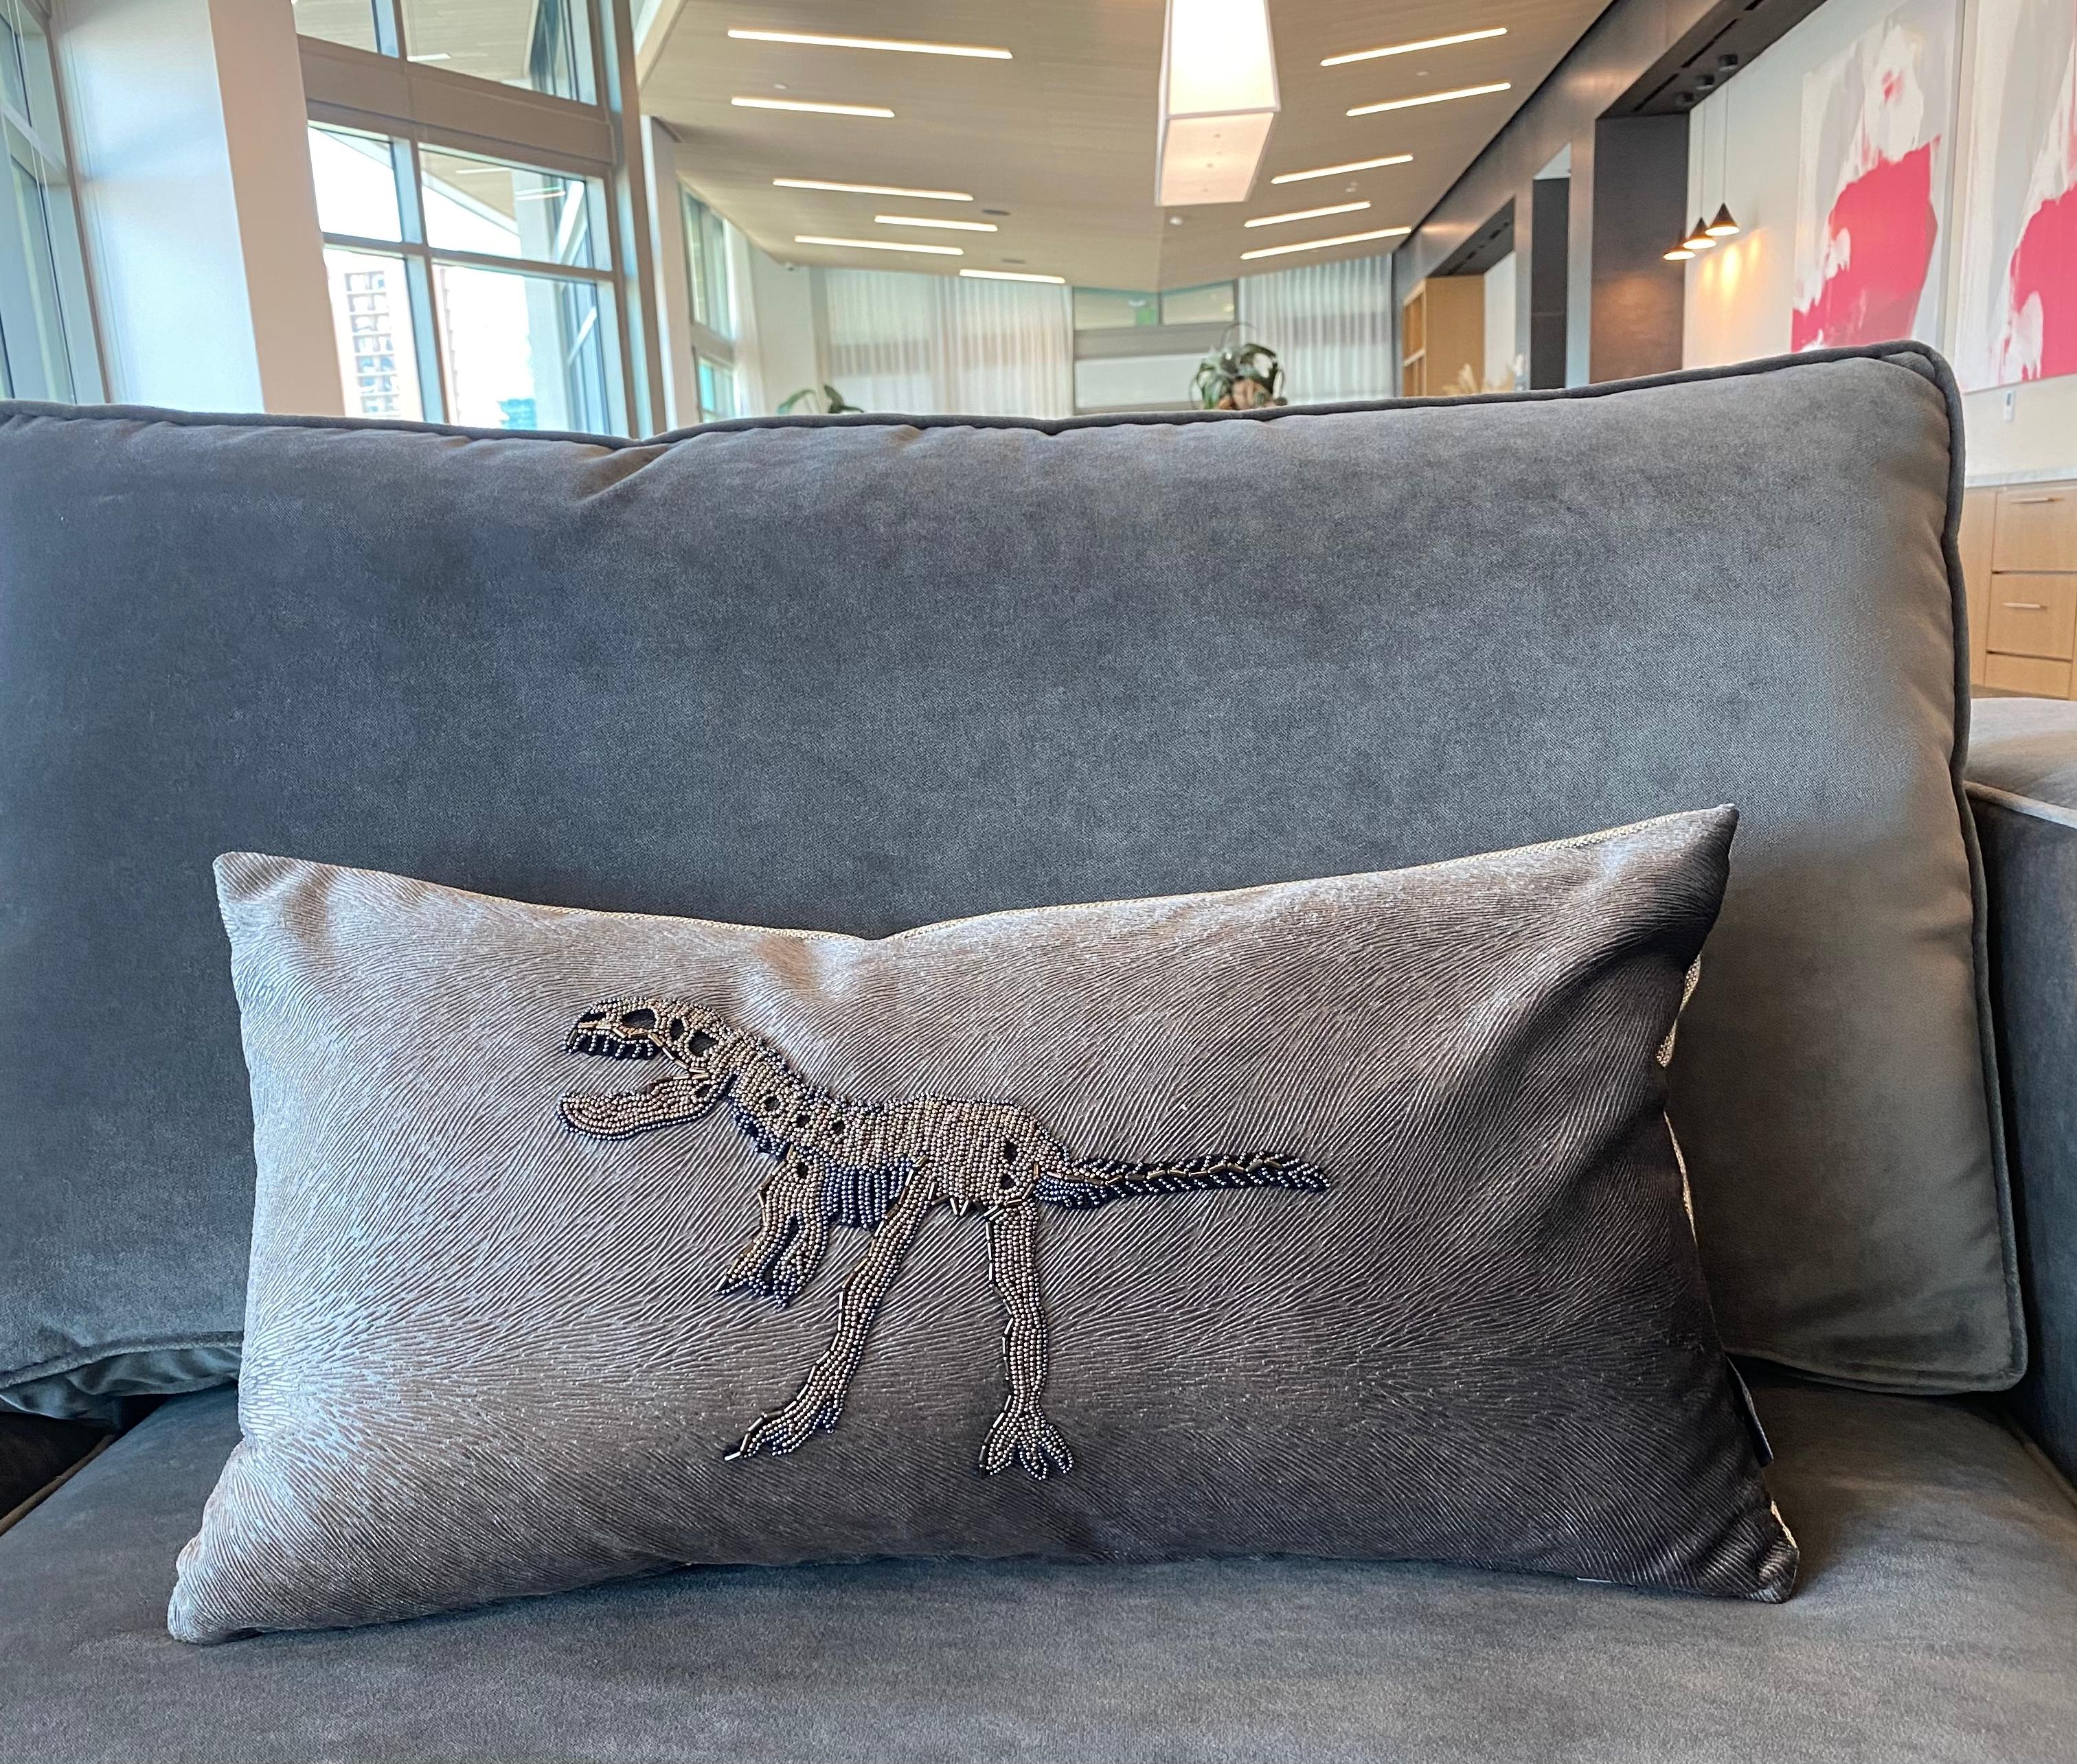 American Velvet throw pillow & hand made embroidery - REX- by Mar de Doce For Sale